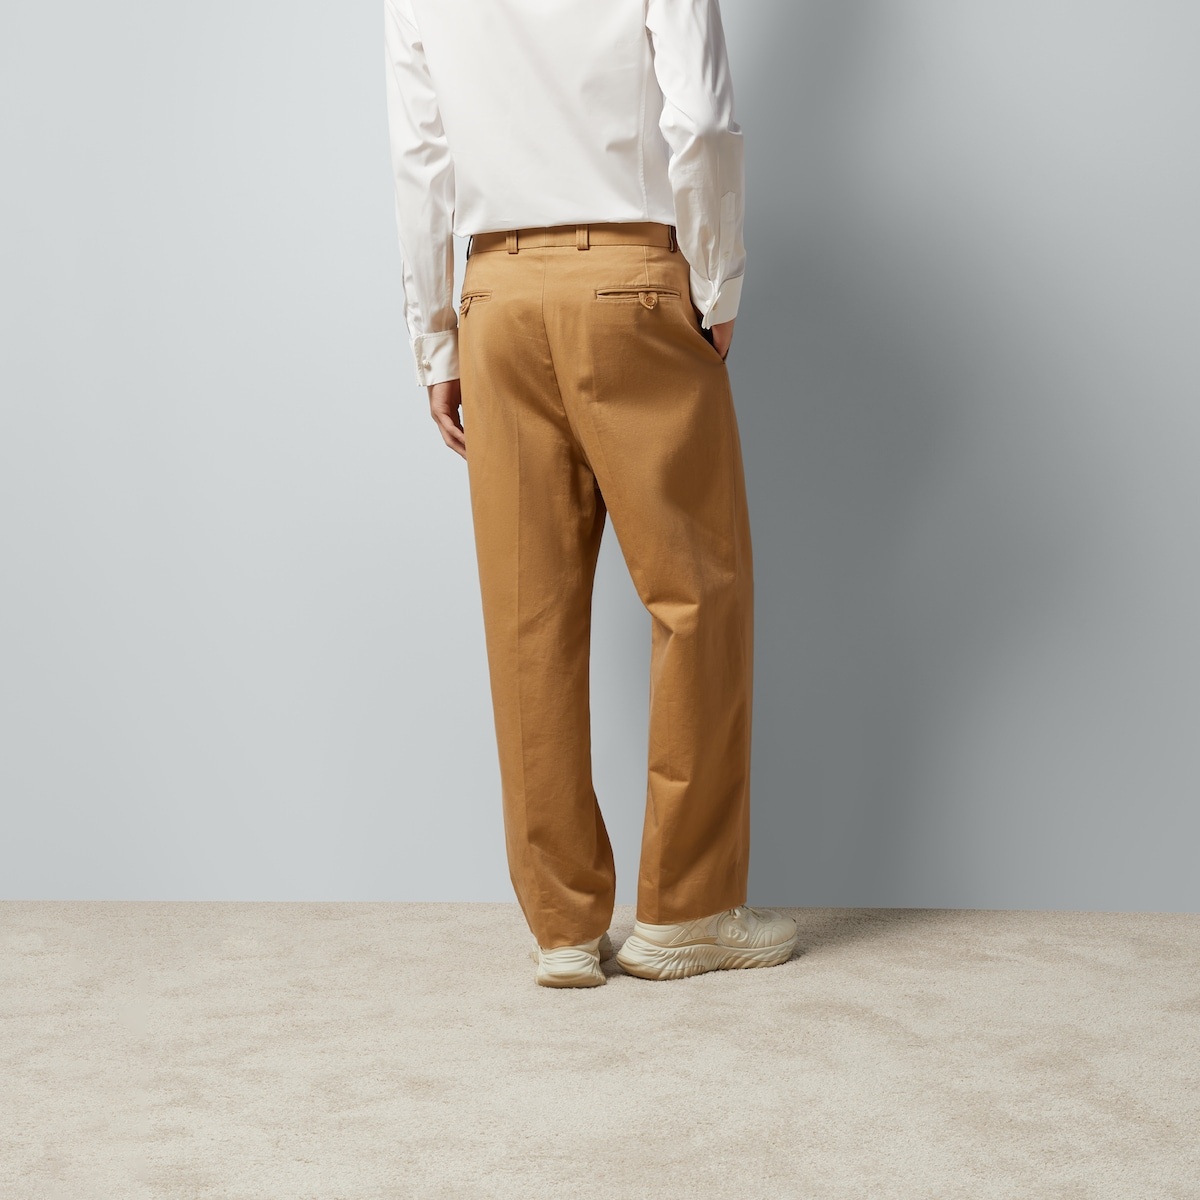 Cotton drill pant - 6